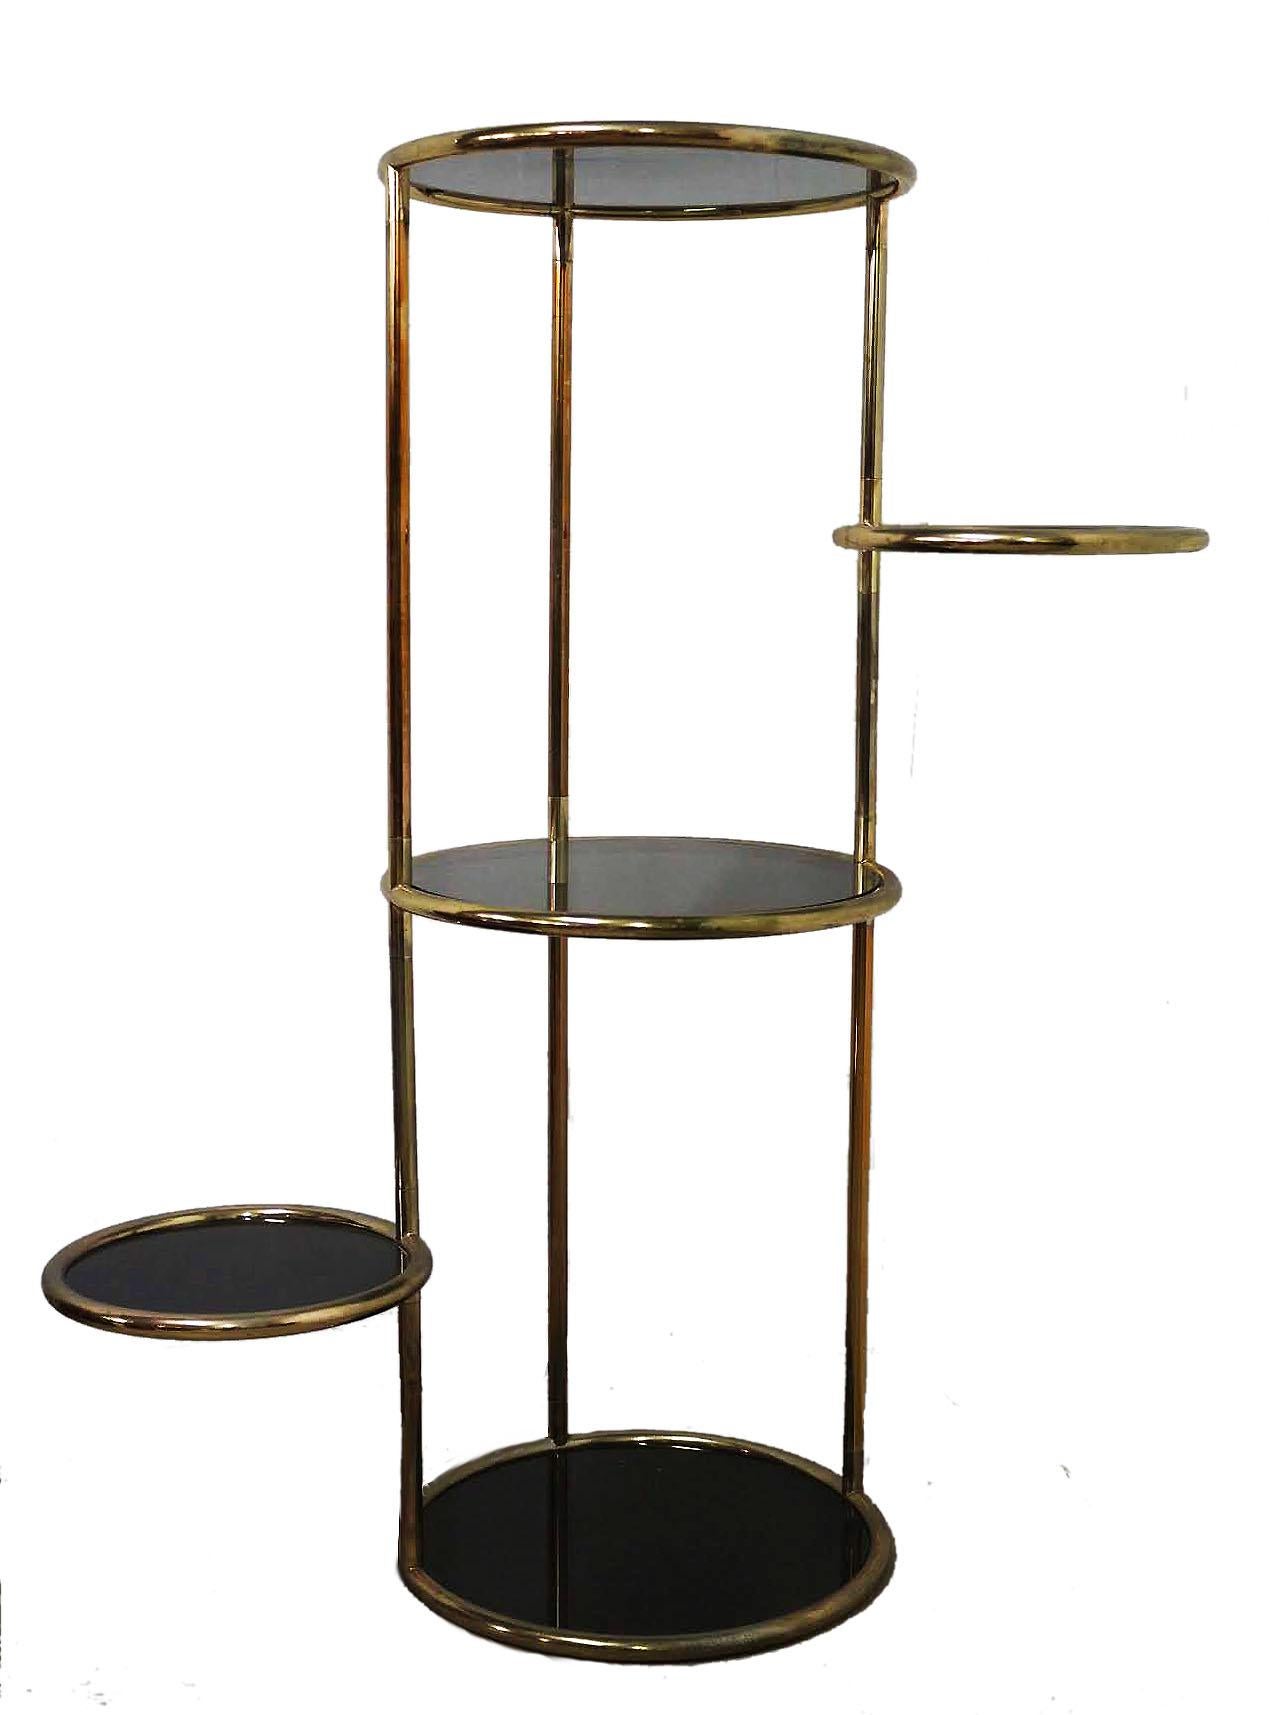 Midcentury versatile display unit five-tier articulating table, circa 1970
Étagère
Smoked glass and gilt chrome
Solid and sturdy
Very good quality
Two shelves swivel out 360 degrees each 40 cms in diameter
Three glass shelves are fixed
Very